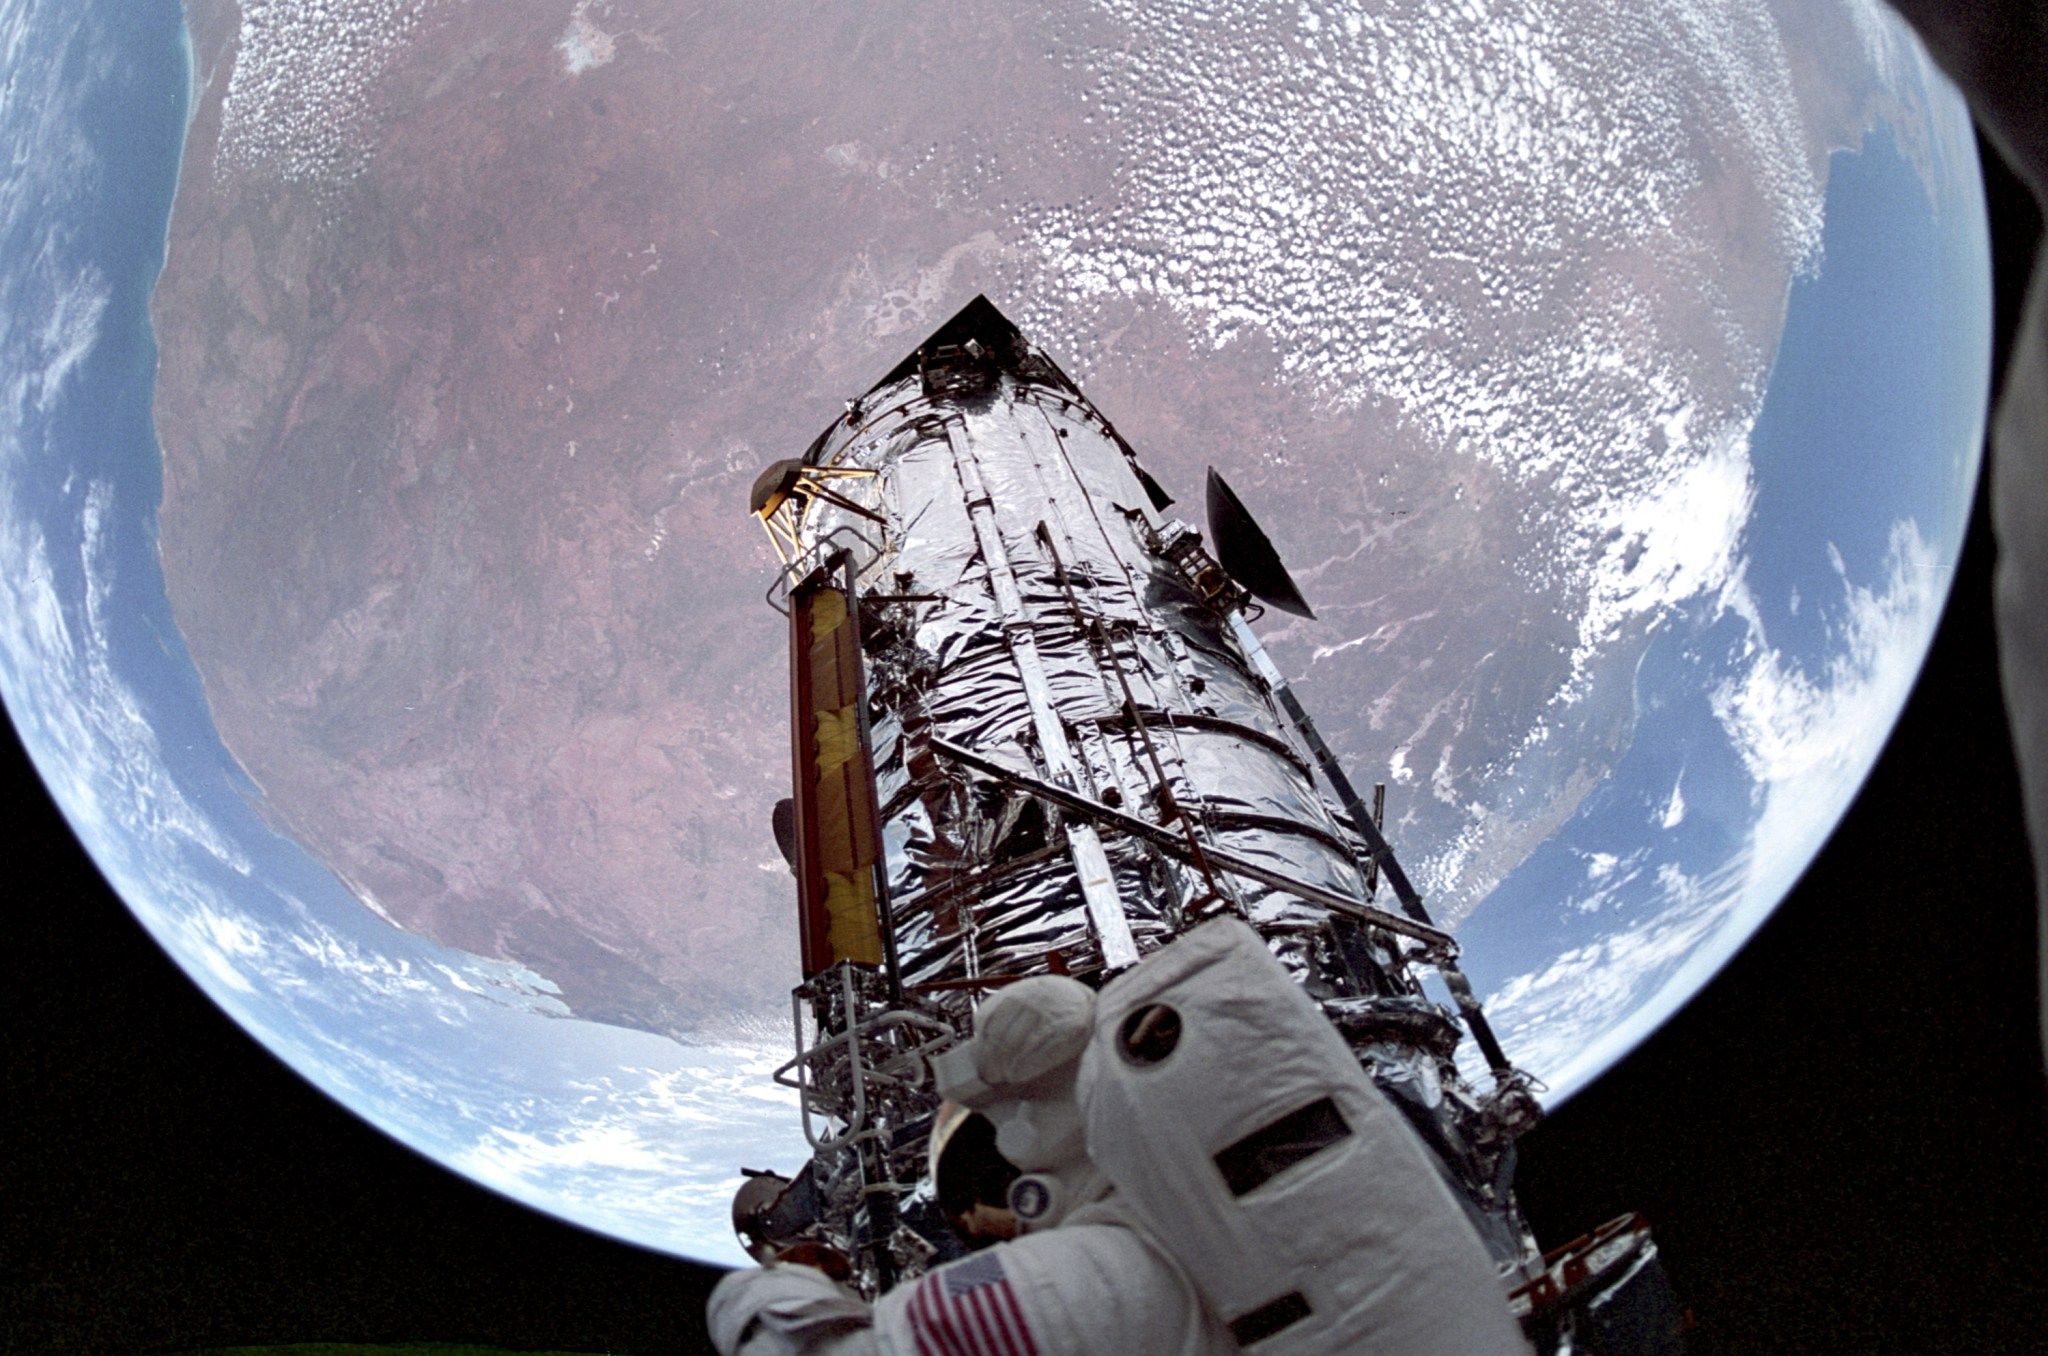 Earth in the background, Hubble in the foreground, and an astronaut at the bottom of Hubble.